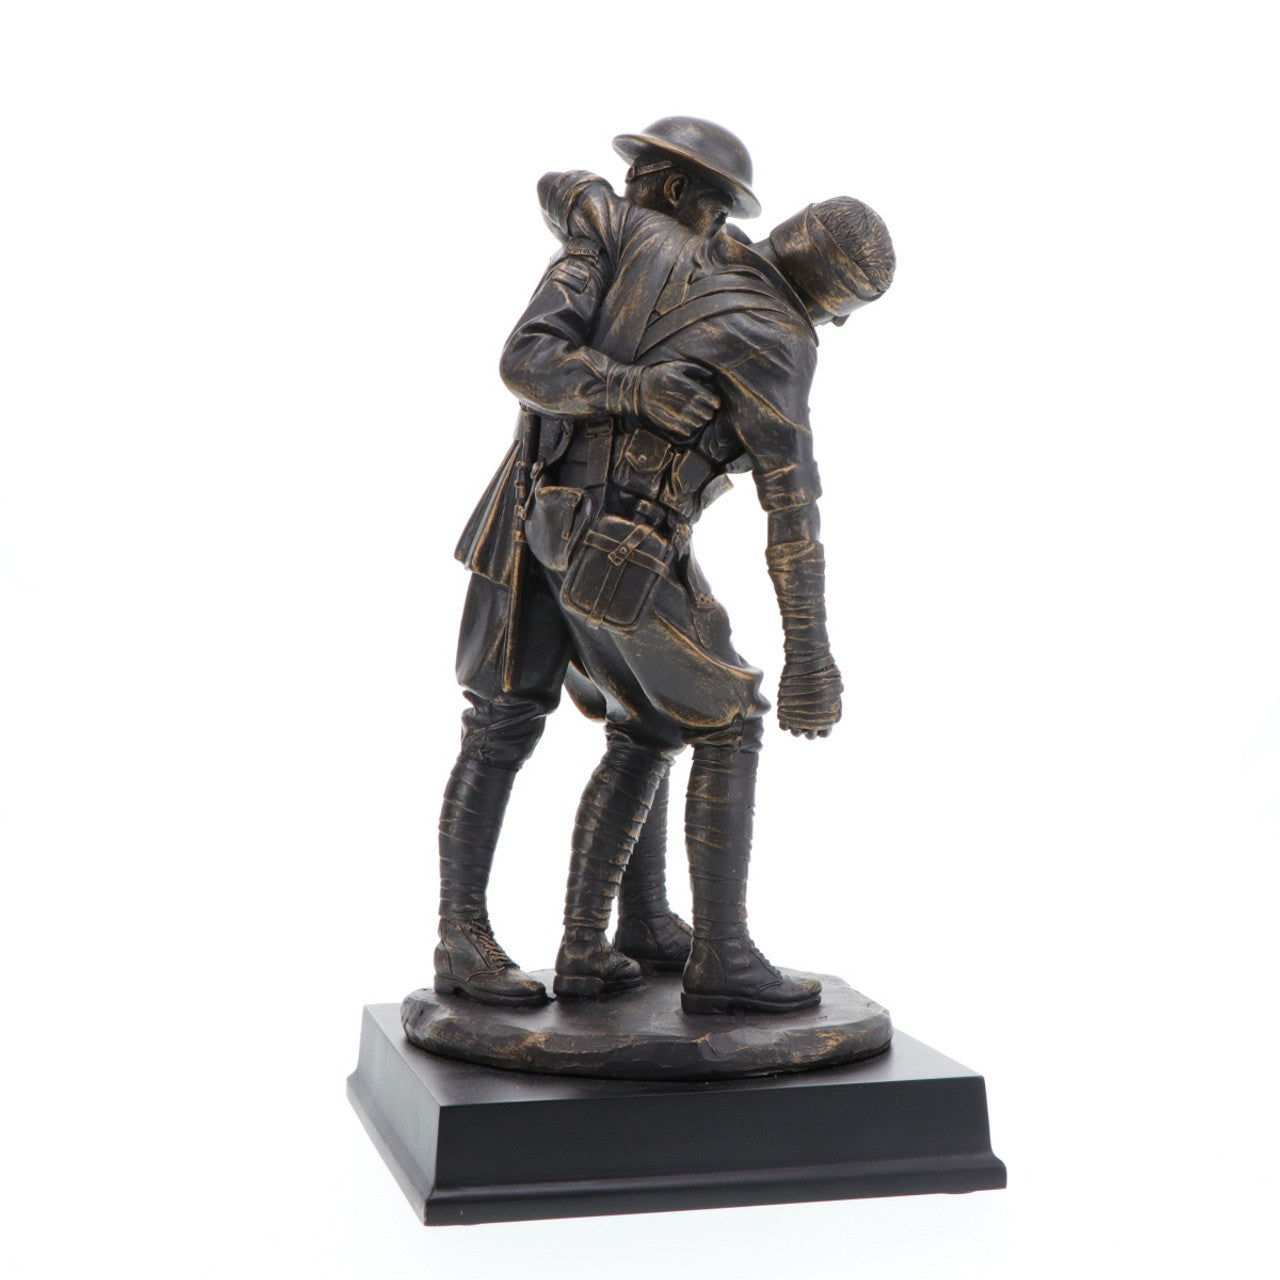 This evocative 300mm tall mounted limited edition cold cast bronze figurine pays tribute to the bravery and sacrifice of the Australian Imperial Force during the Great War 1914-1918. It serves as a poignant reminder of the immense toll the war took on Australia, with over 330,000 soldiers serving overseas and more than 62,000 losing their lives. www.defenceqstore.com.au